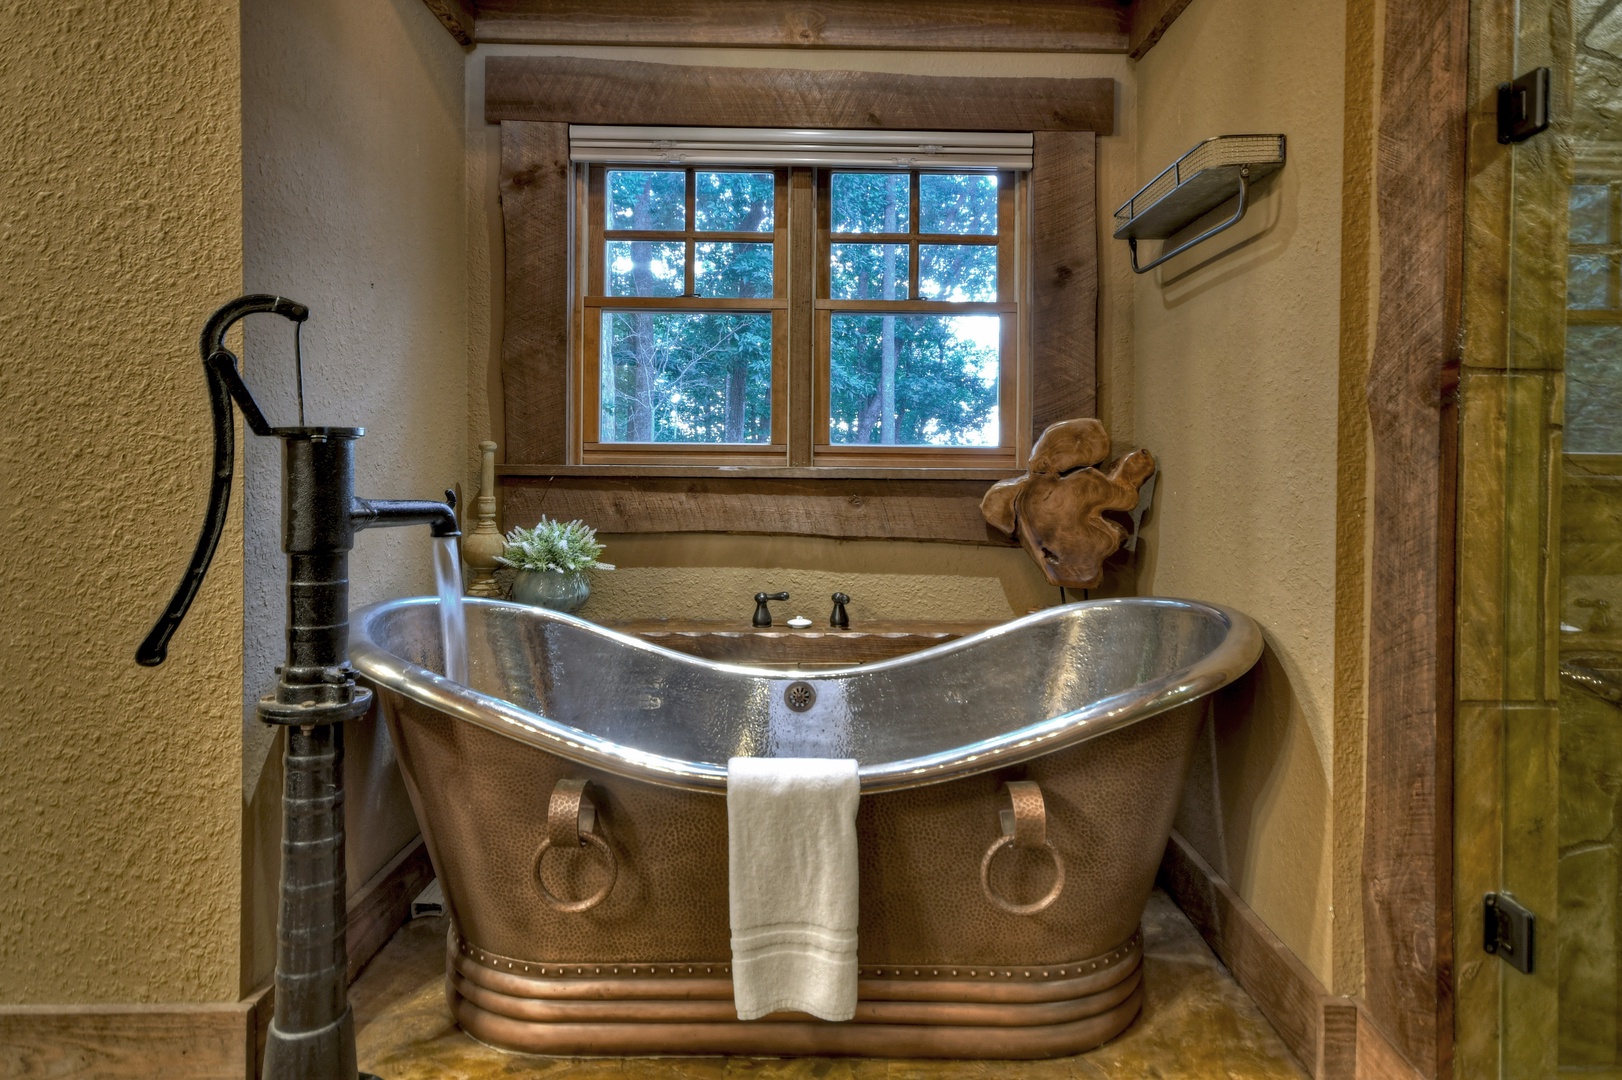 Heavenly Day - Entry Level King Suite Copper Soaking Tub